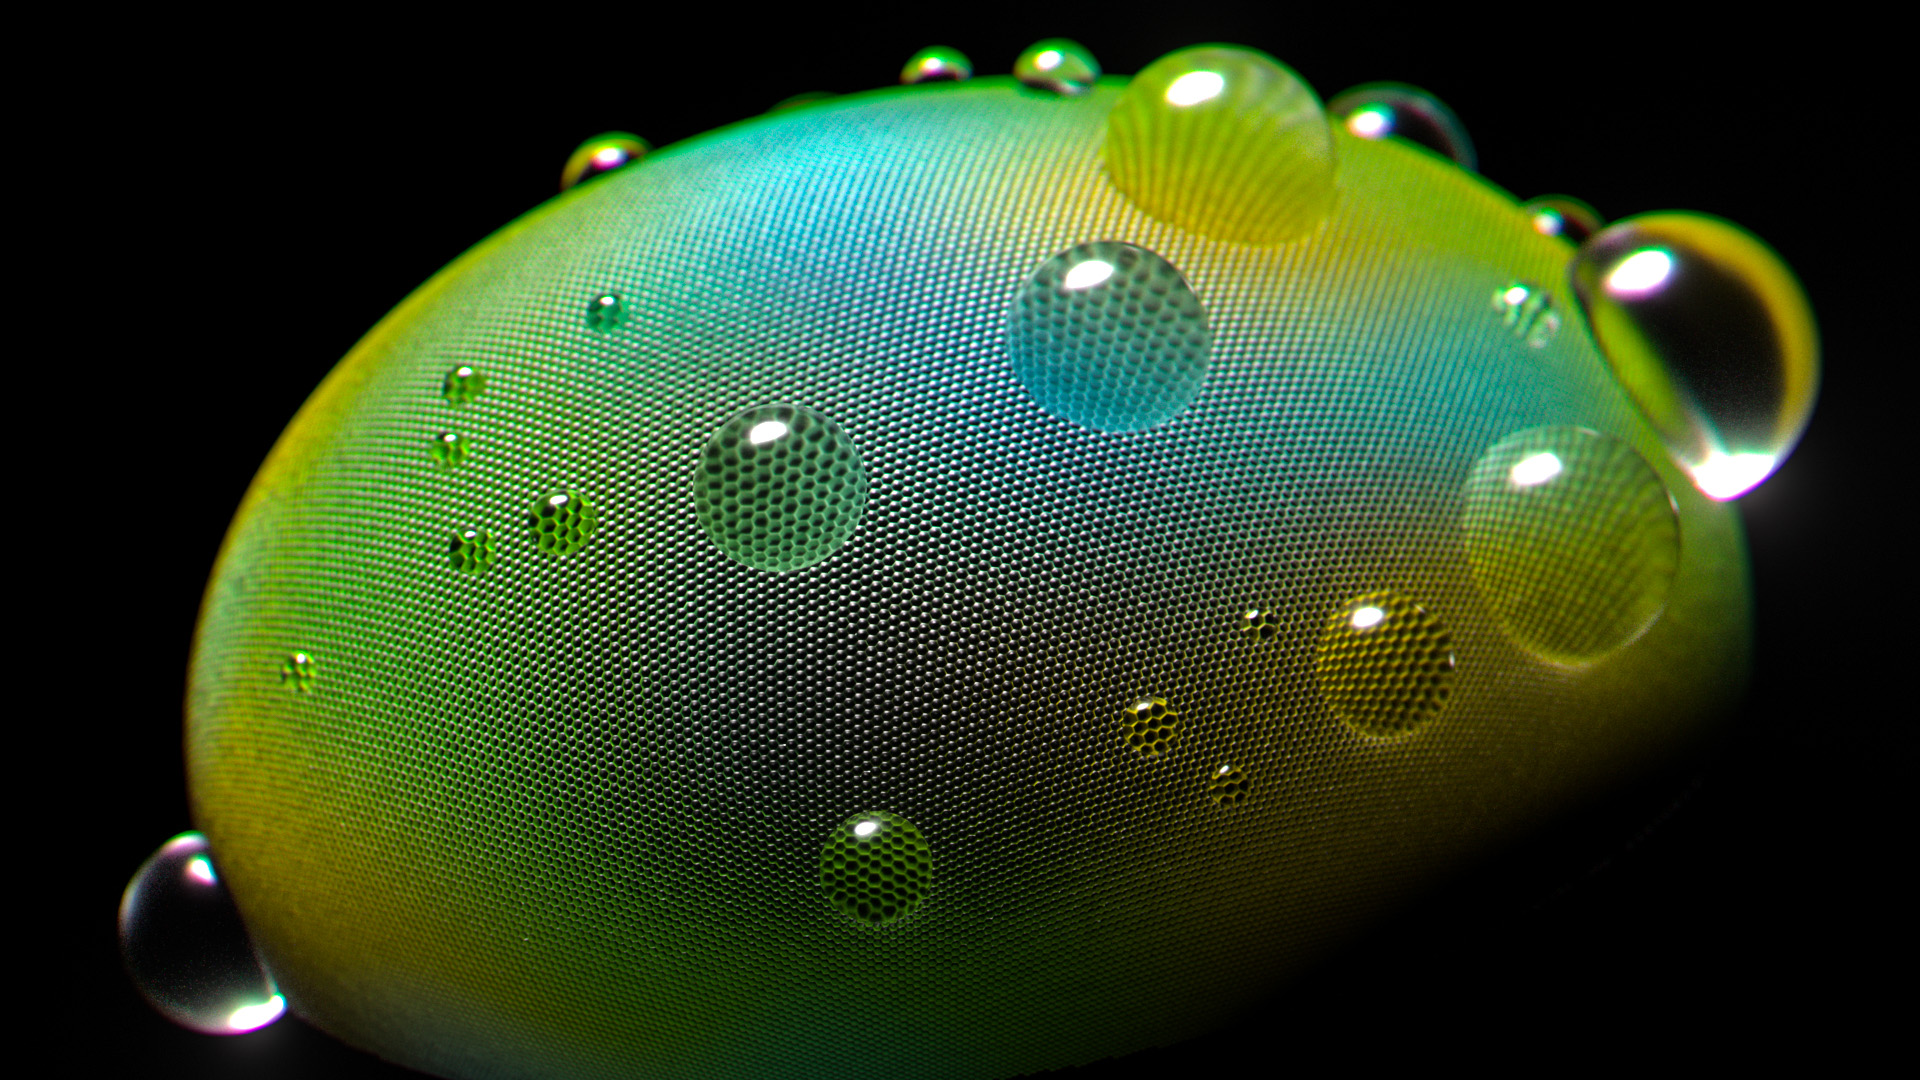 An isolated render of a colorful pigmented compound eye, such as may be found on a dragonfly. Dew-like small water droplets of varying size enlarge the eye's structure through diffraction.